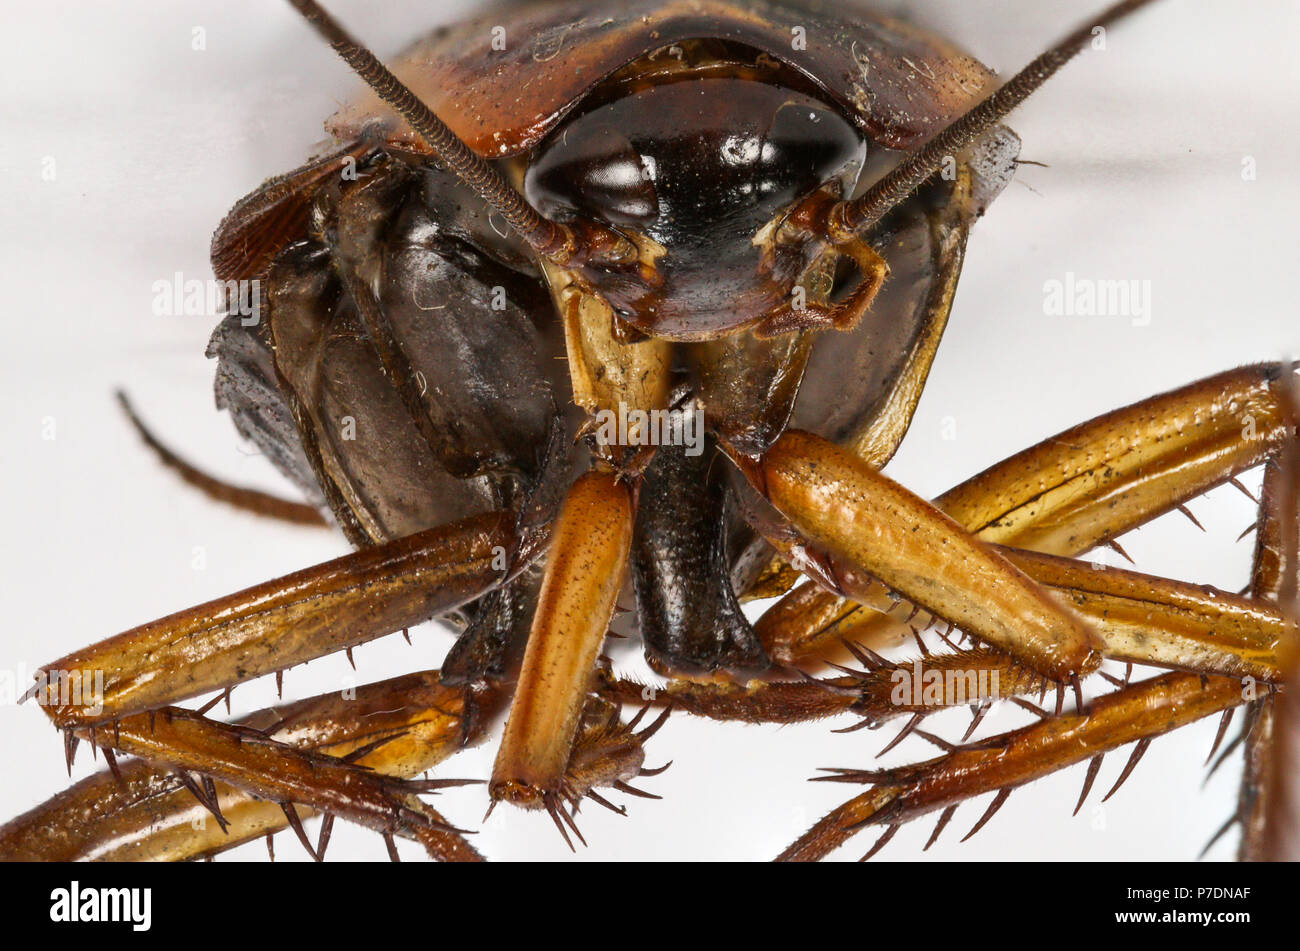 Cockroach dead in macro closeup. The cockroach is an urban insect capable of transmitting various diseases, viruses and bacteria vector. Stock Photo